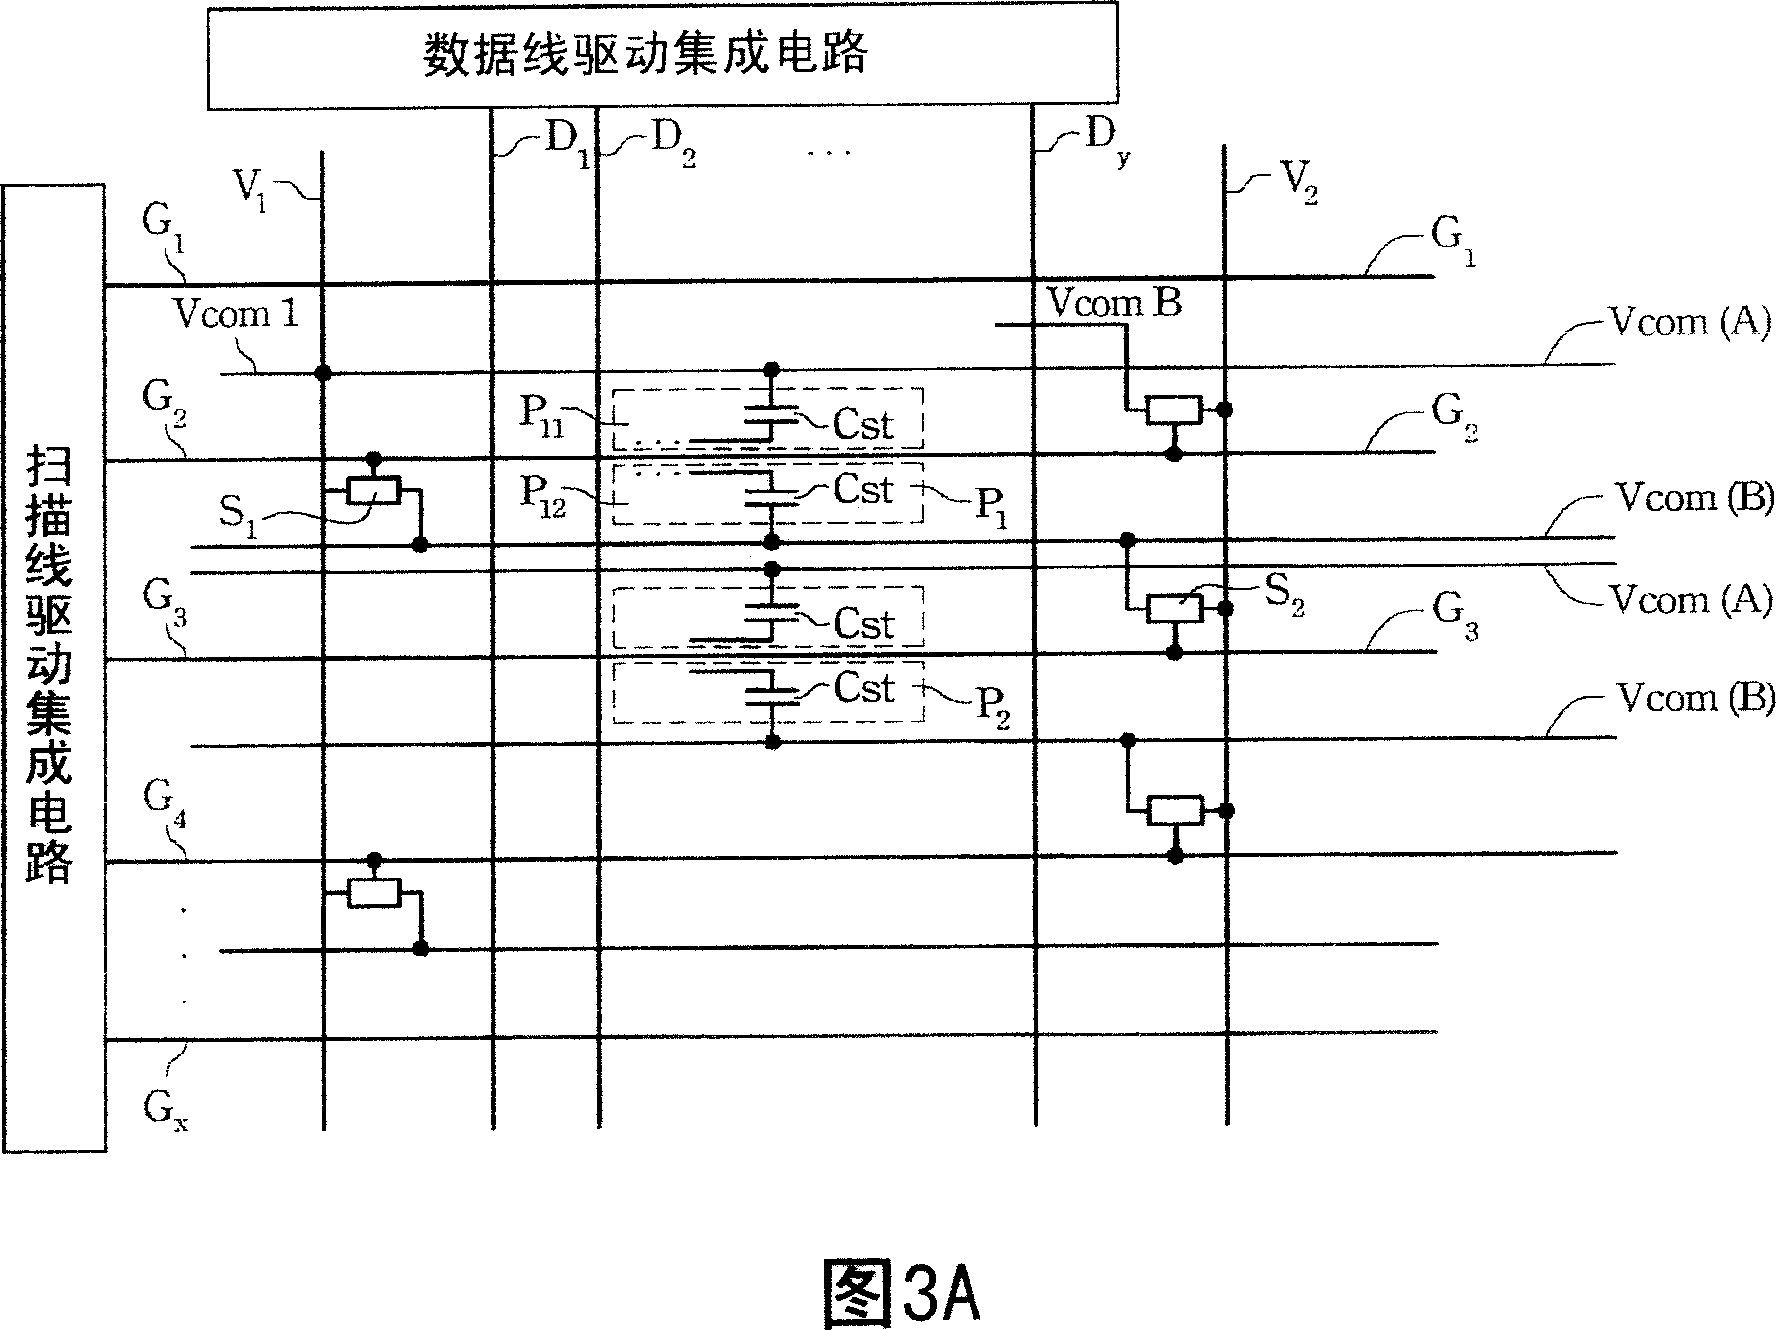 Structure of liquid crystal display